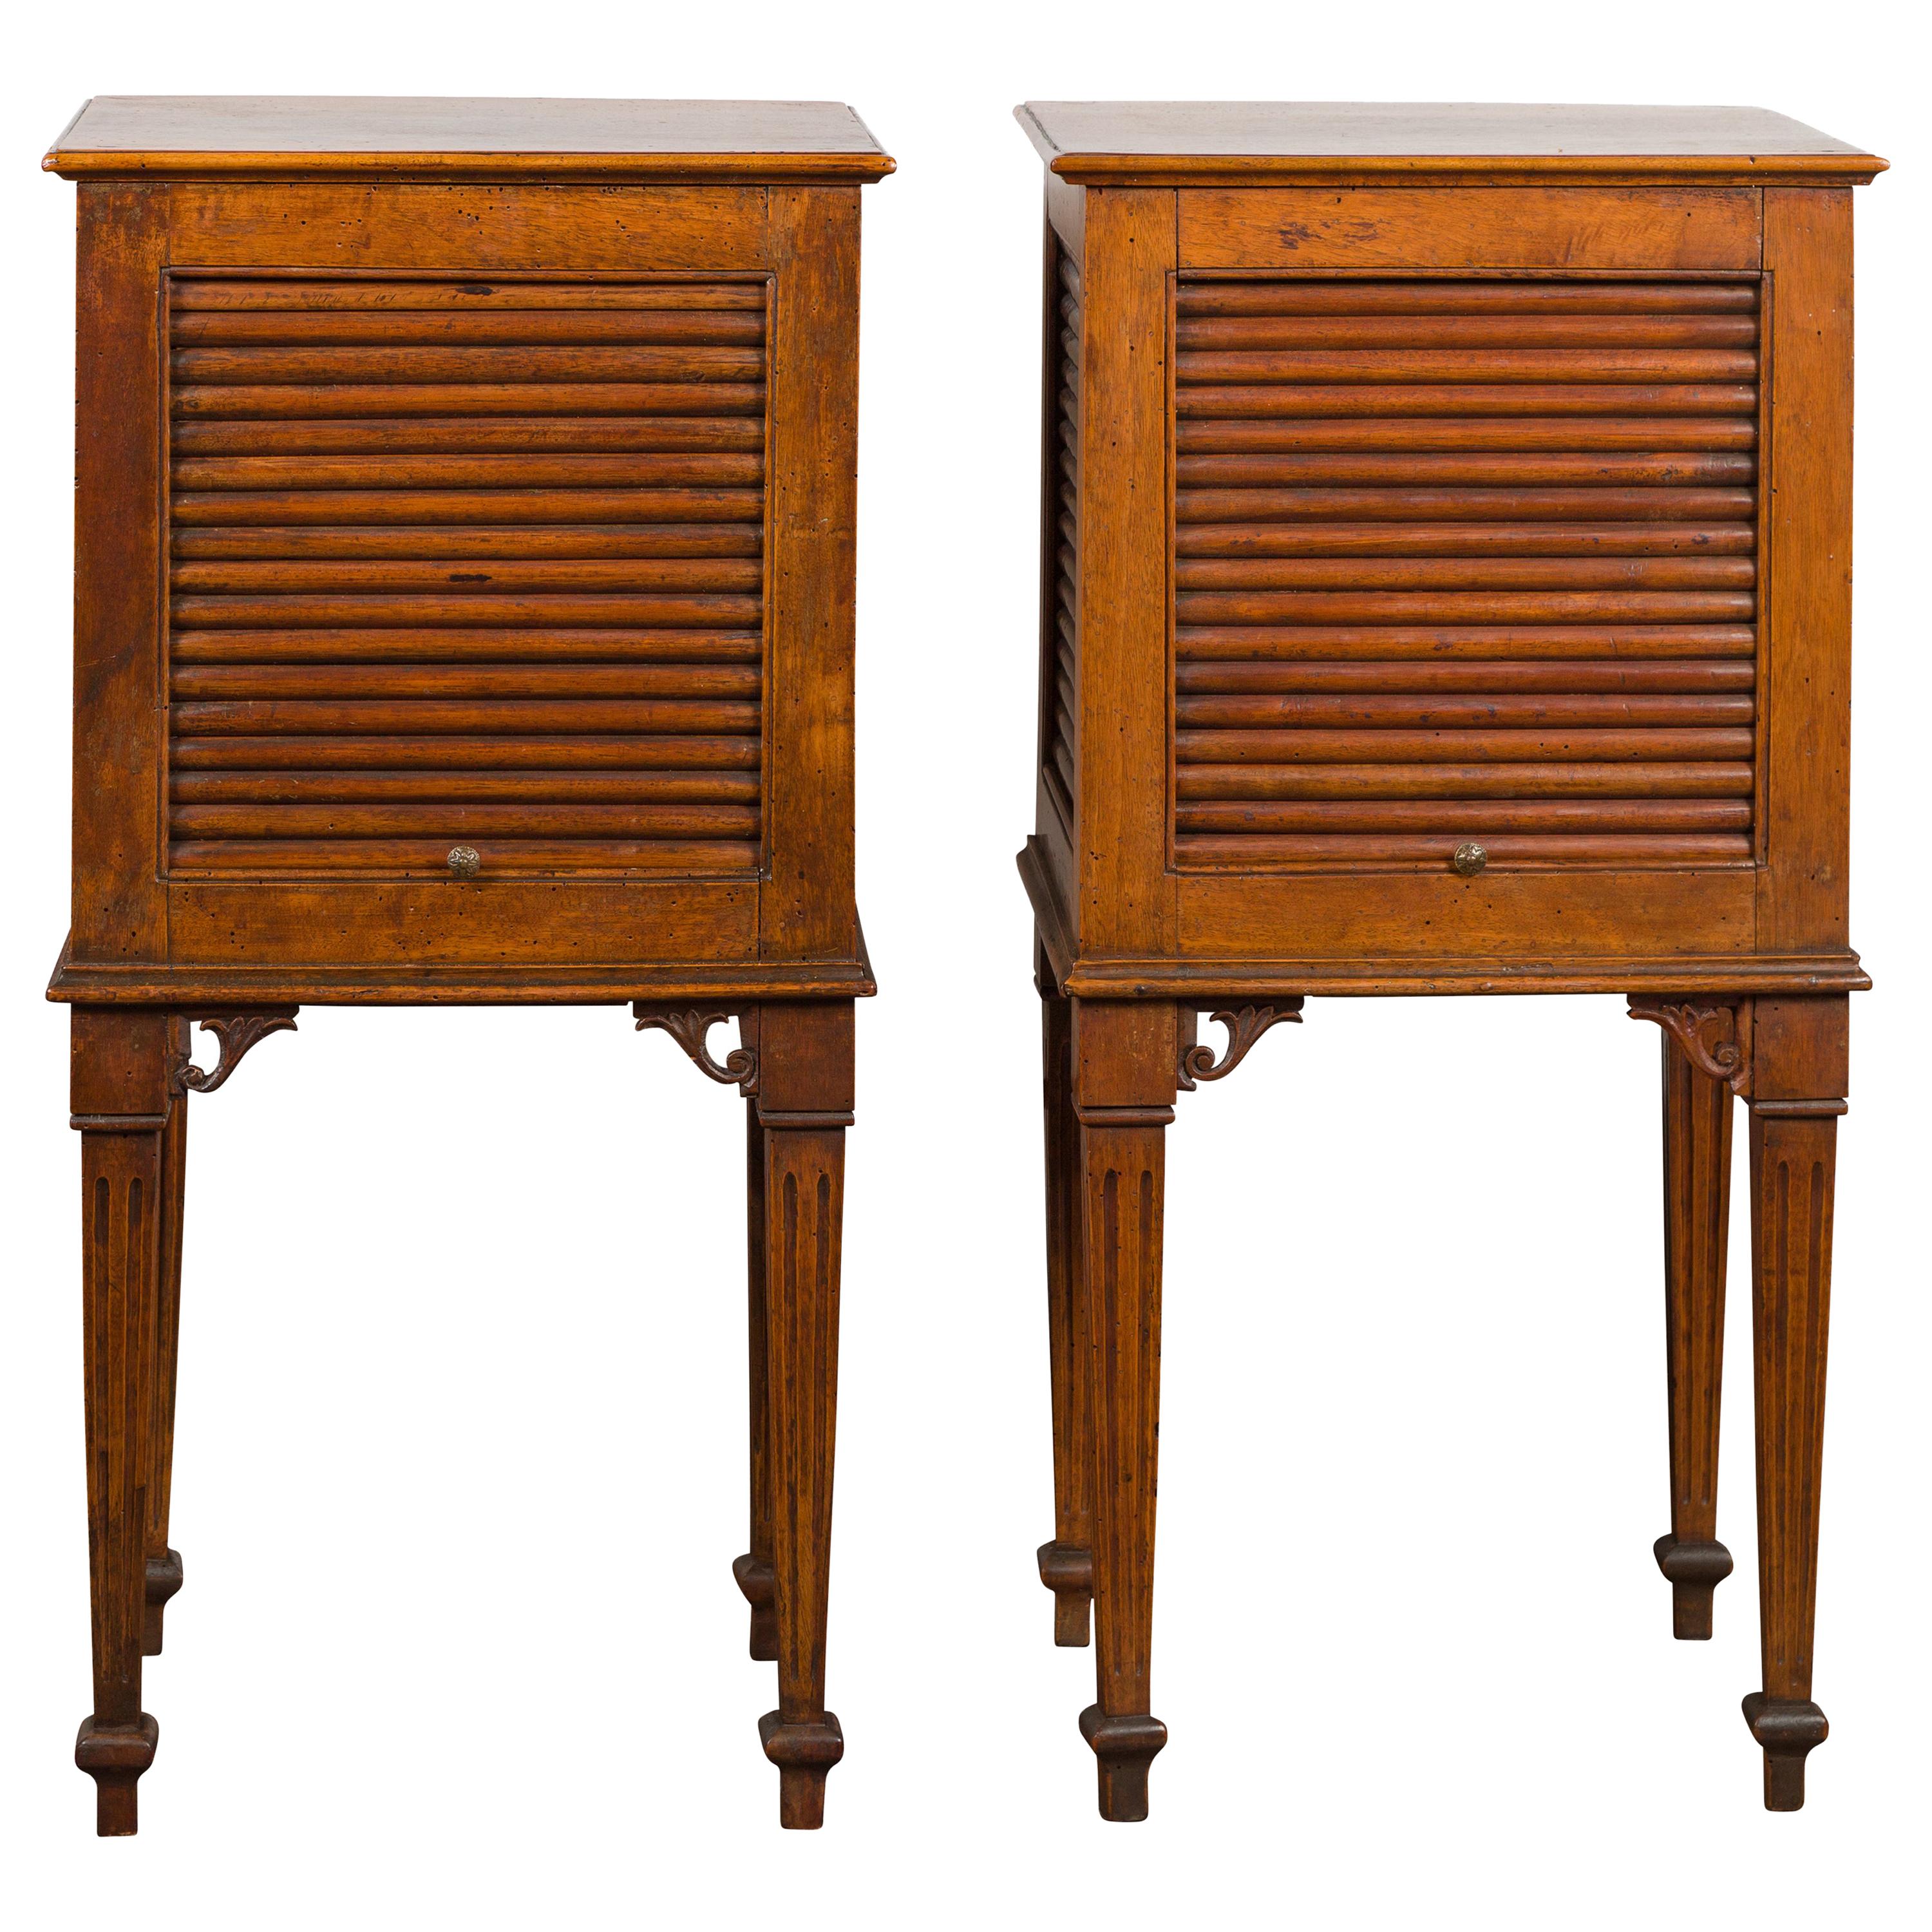 Pair of French 1830s Restauration Walnut Tambour Door Tables with Tapered Legs